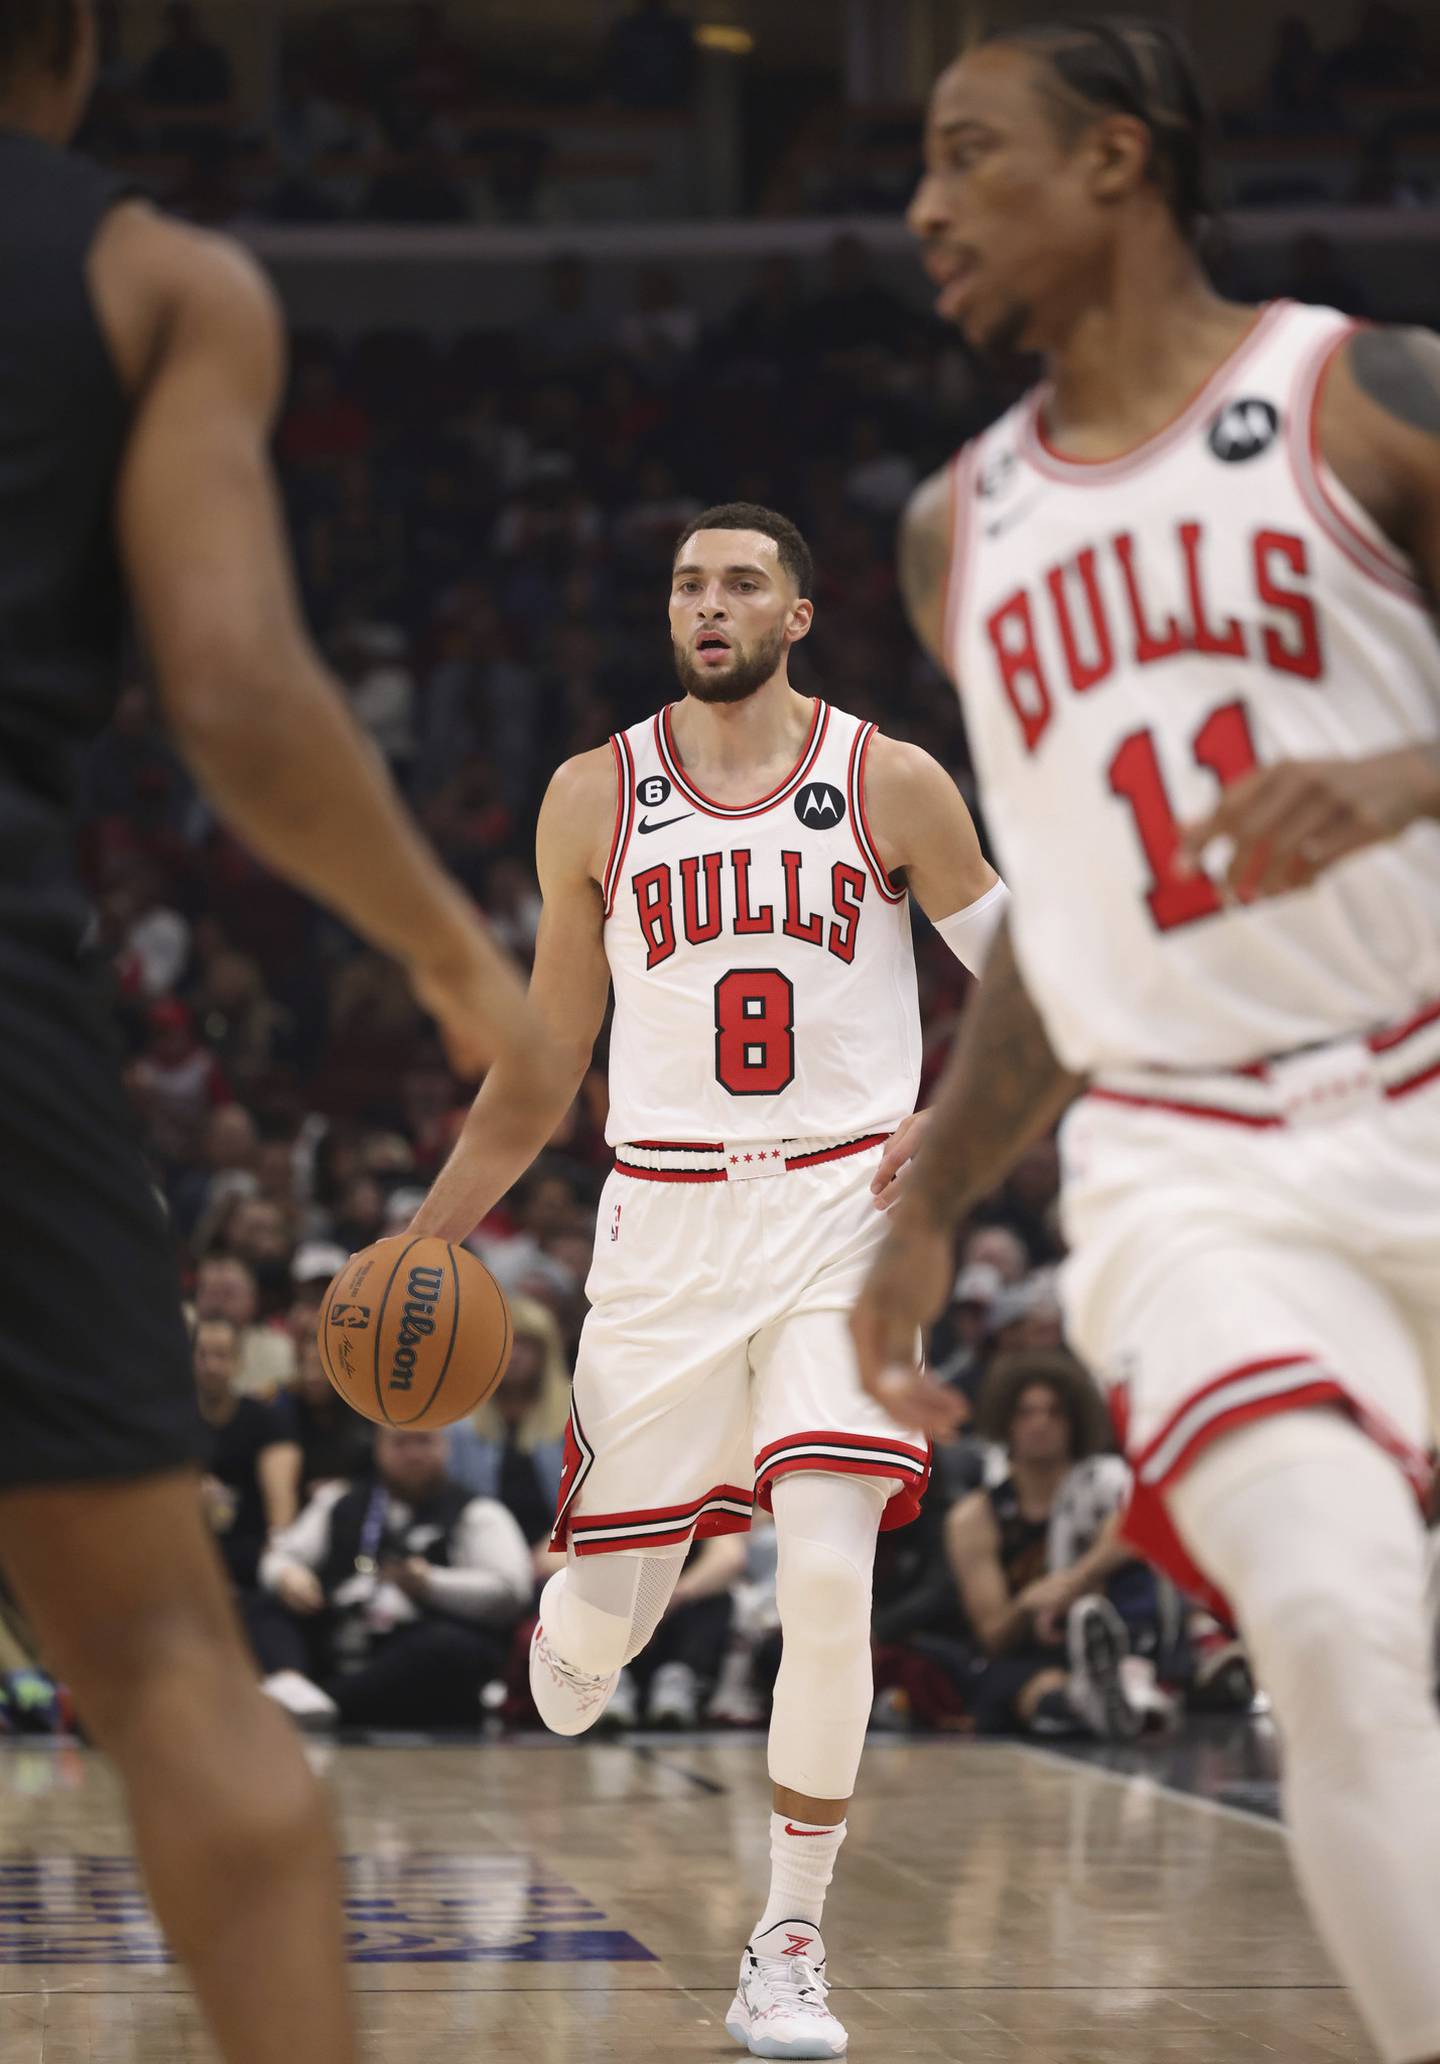 Bulls guard Zach LaVine (8) advances the ball in the first quarter against the Cavaliers on Saturday at the United Center. LaVine scored 23 points in his season debut, but the Bulls lost 128-96. 